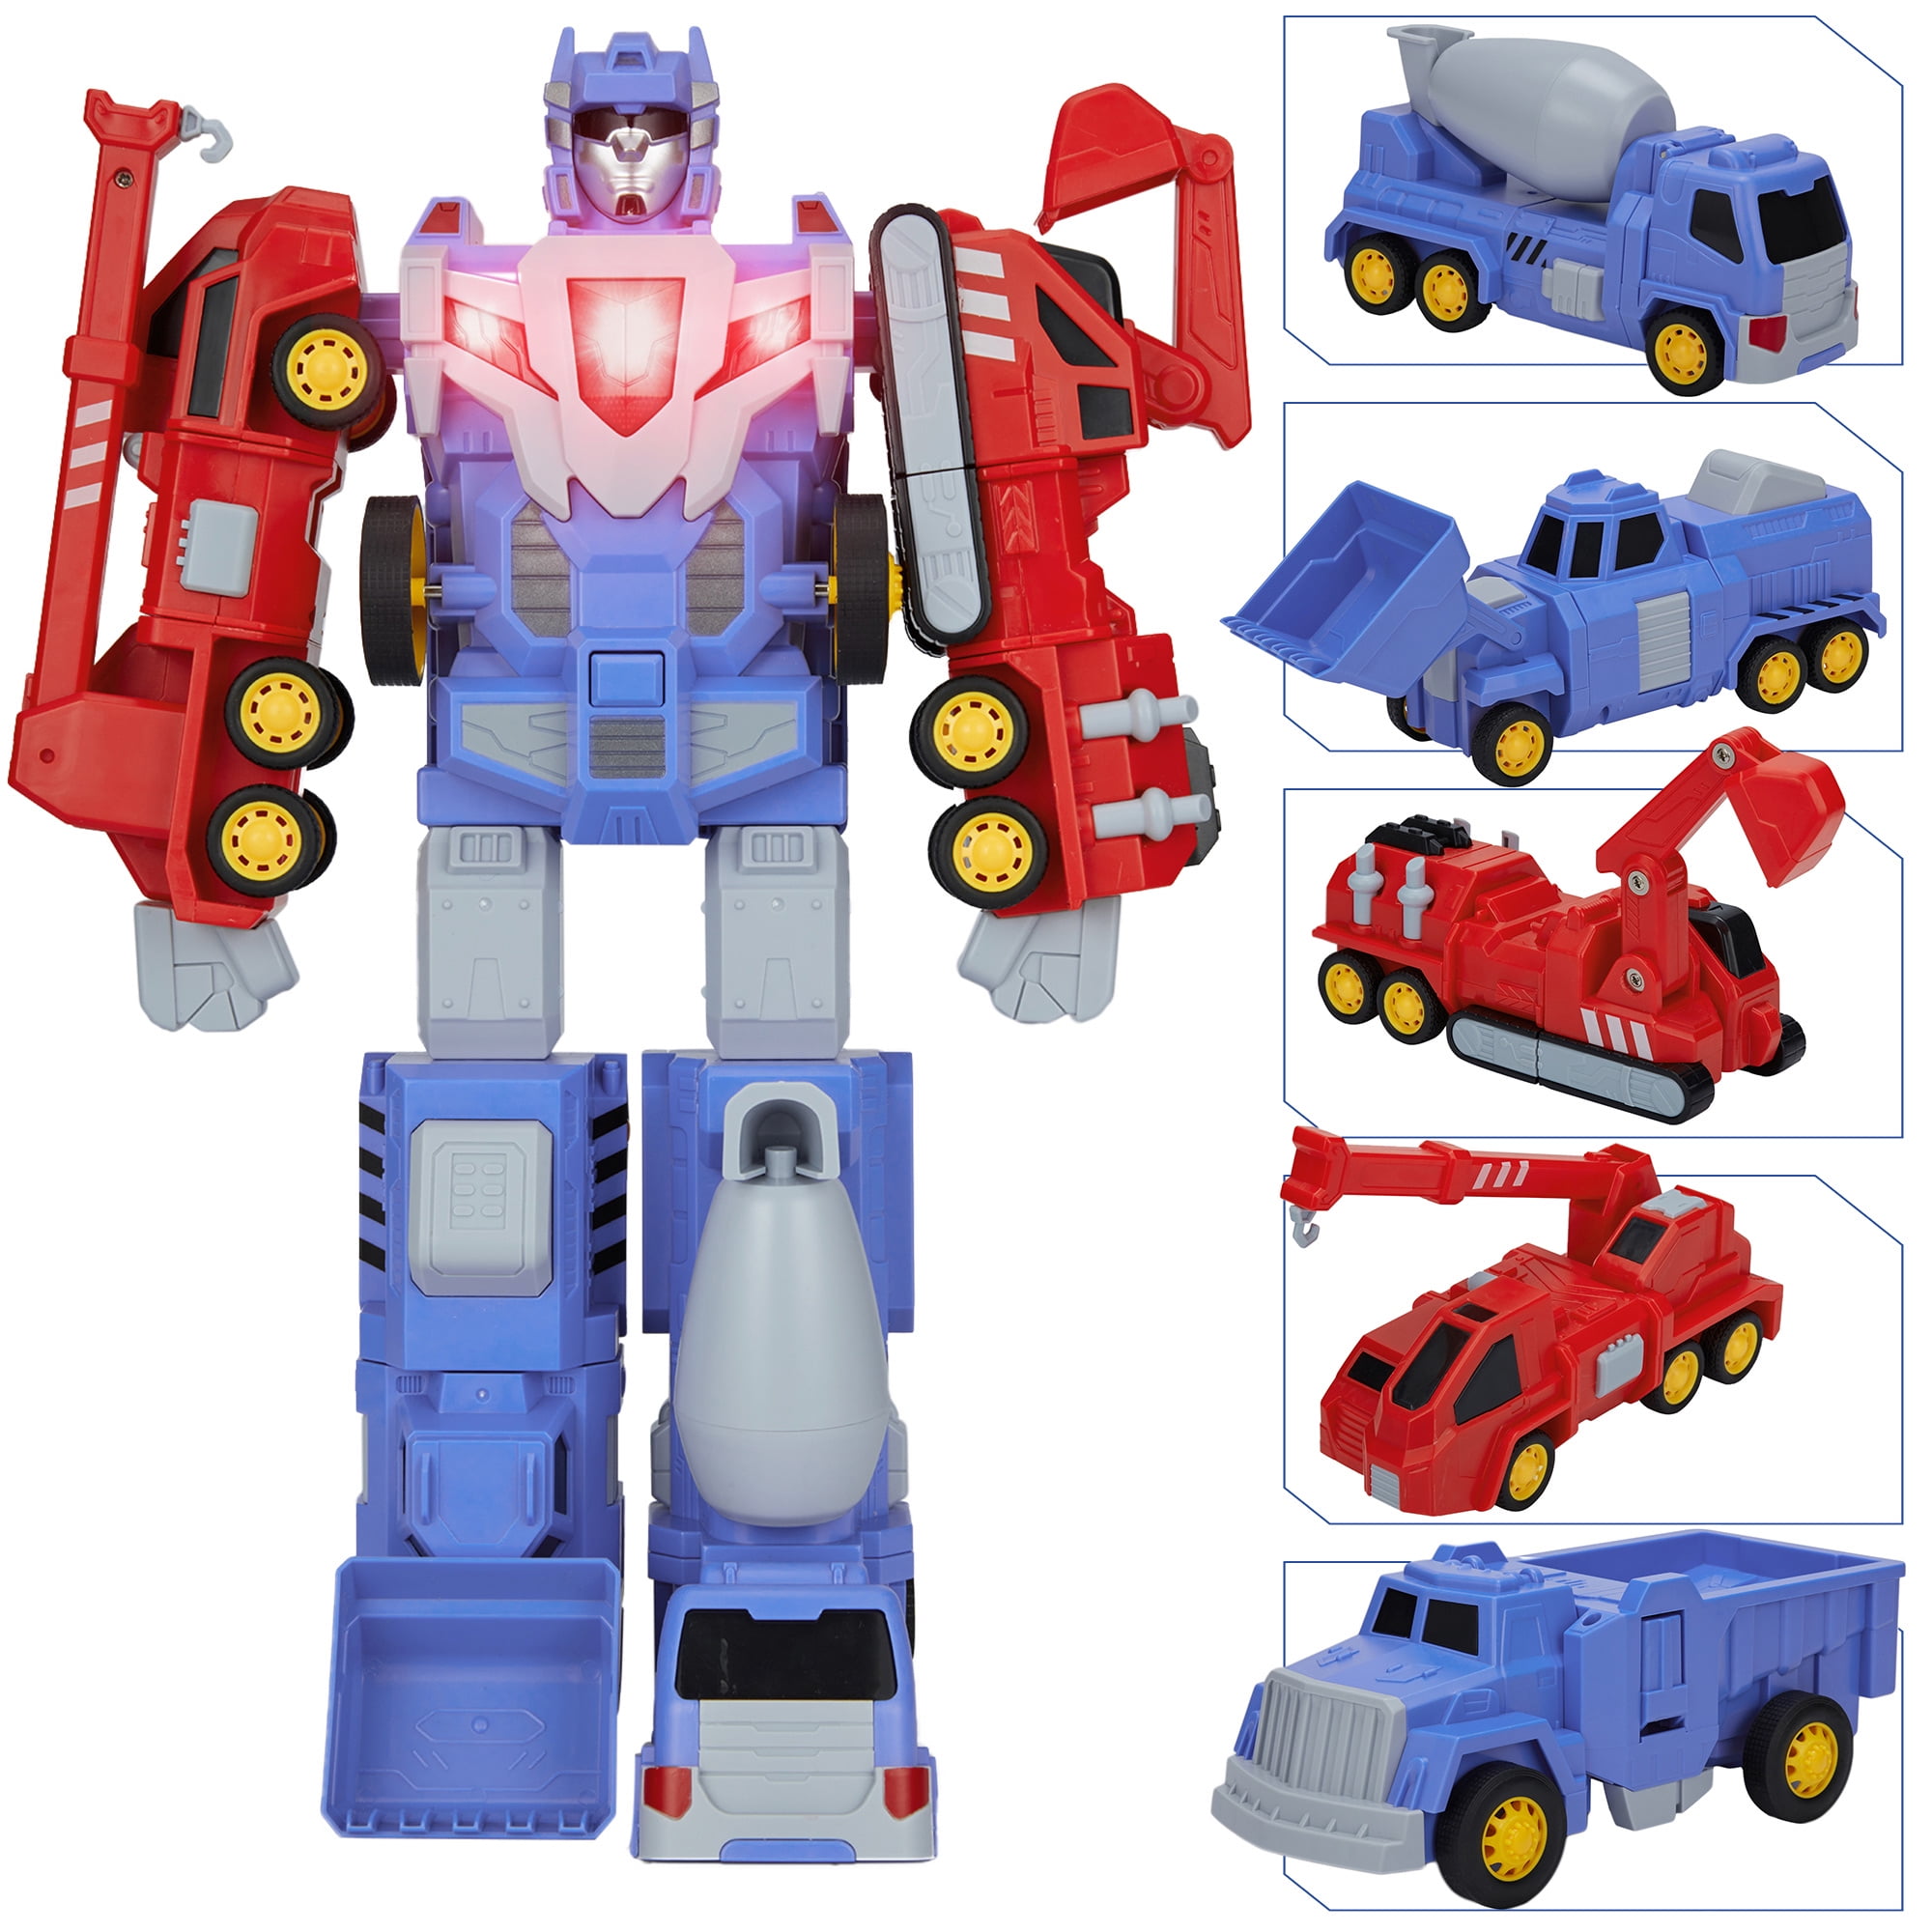 Construction Vehicles Transform into Robot Action Figures,Kids 5 in 1 Large Transformer Toys,Truck & Tool Workbench,Preschool STEM Converting Set for 3 4 5 6 7 8 Year Old Indoor Outdoor Birthday Gifts 